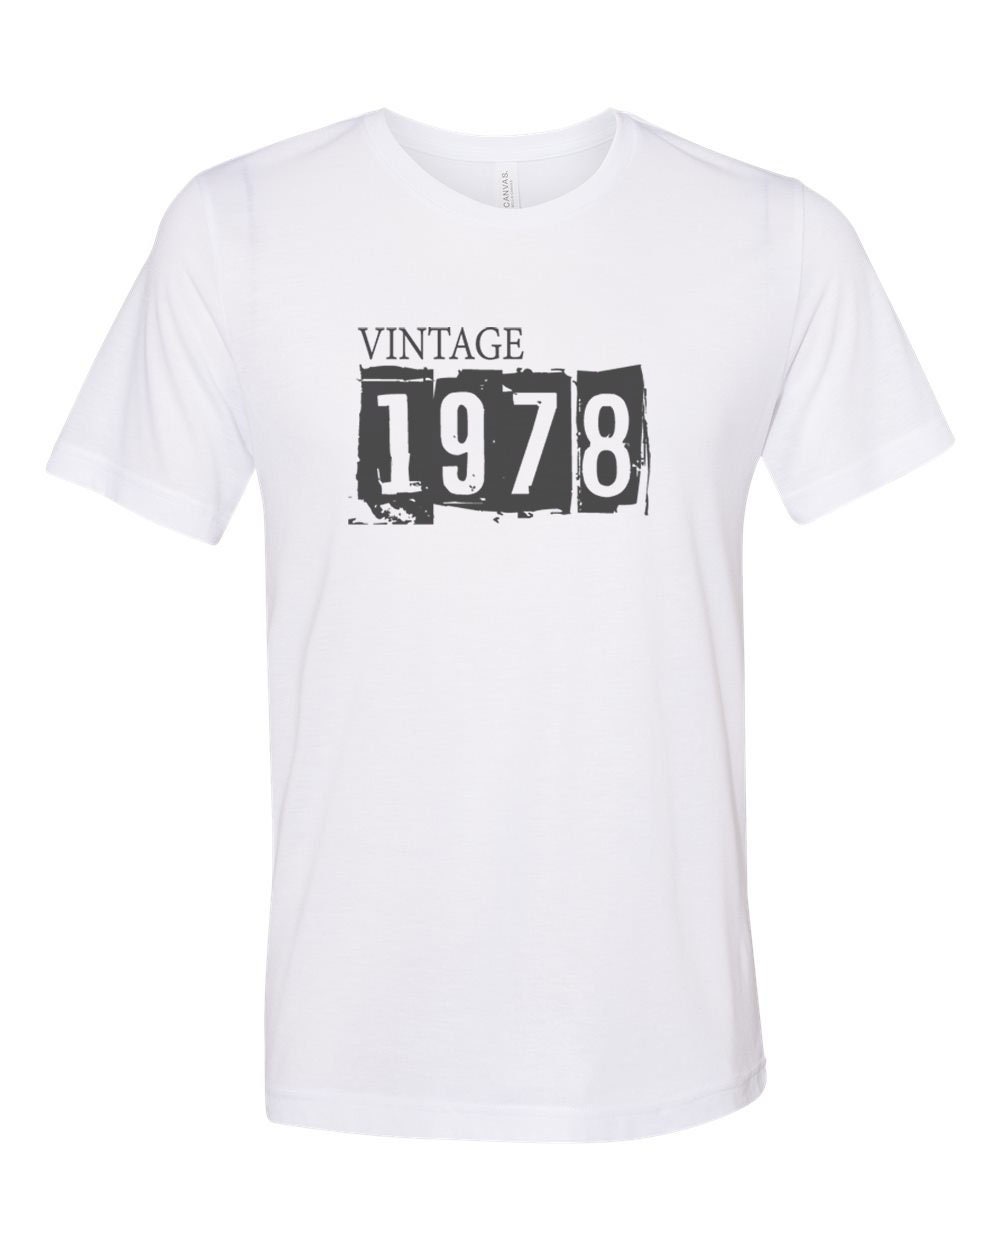 Discover Vintage 1978, 1978 Shirt, Unisex, Born In 1978, Soft Bella Canvas, Sublimation, 1978, 1978 Tee, Gift For Her, Birthday Gift